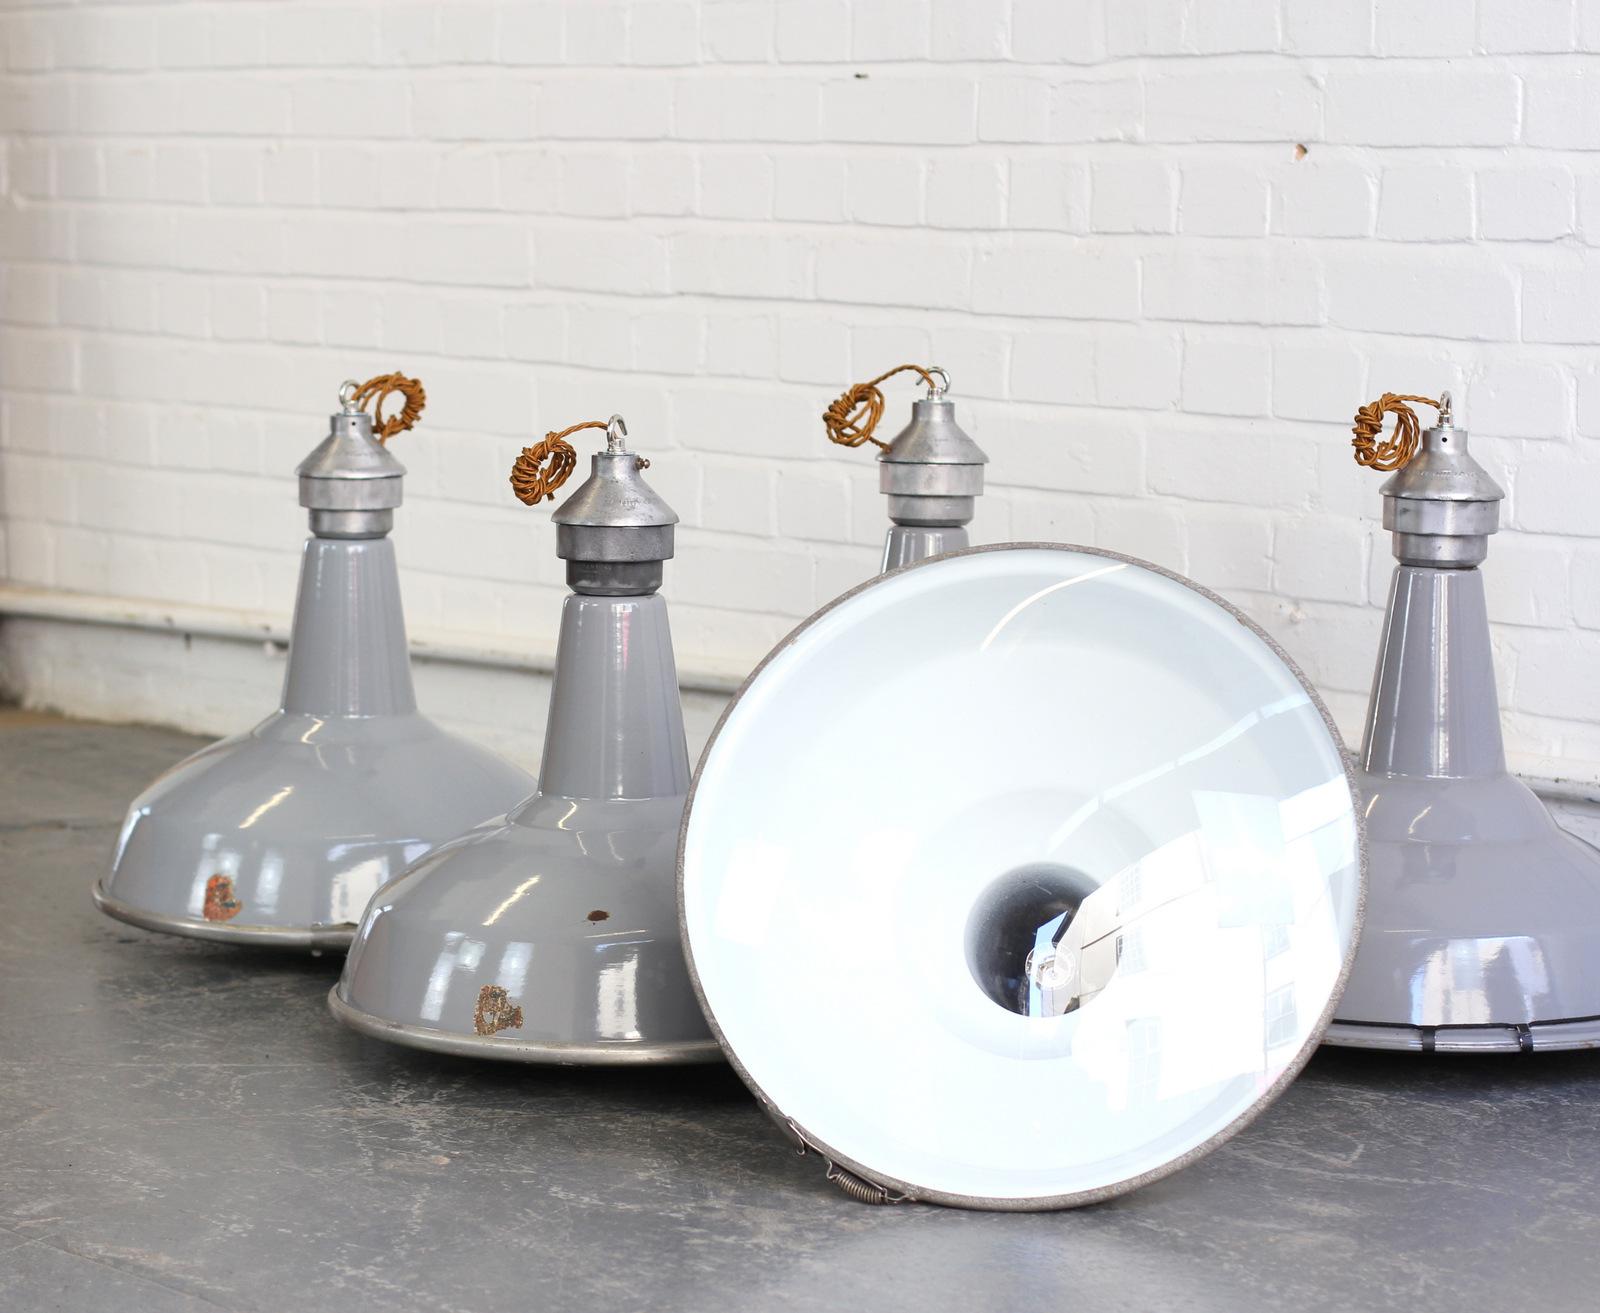 Large saw mill lights by Benjamin, circa 1950s

- Price is per light (10 available)
- Vitreous grey enamel shades
- Domed glass reflectors
- Aluminium tops
- Takes E27 fitting bulbs
- Comes with 100cm of gold twist cable
- Comes with